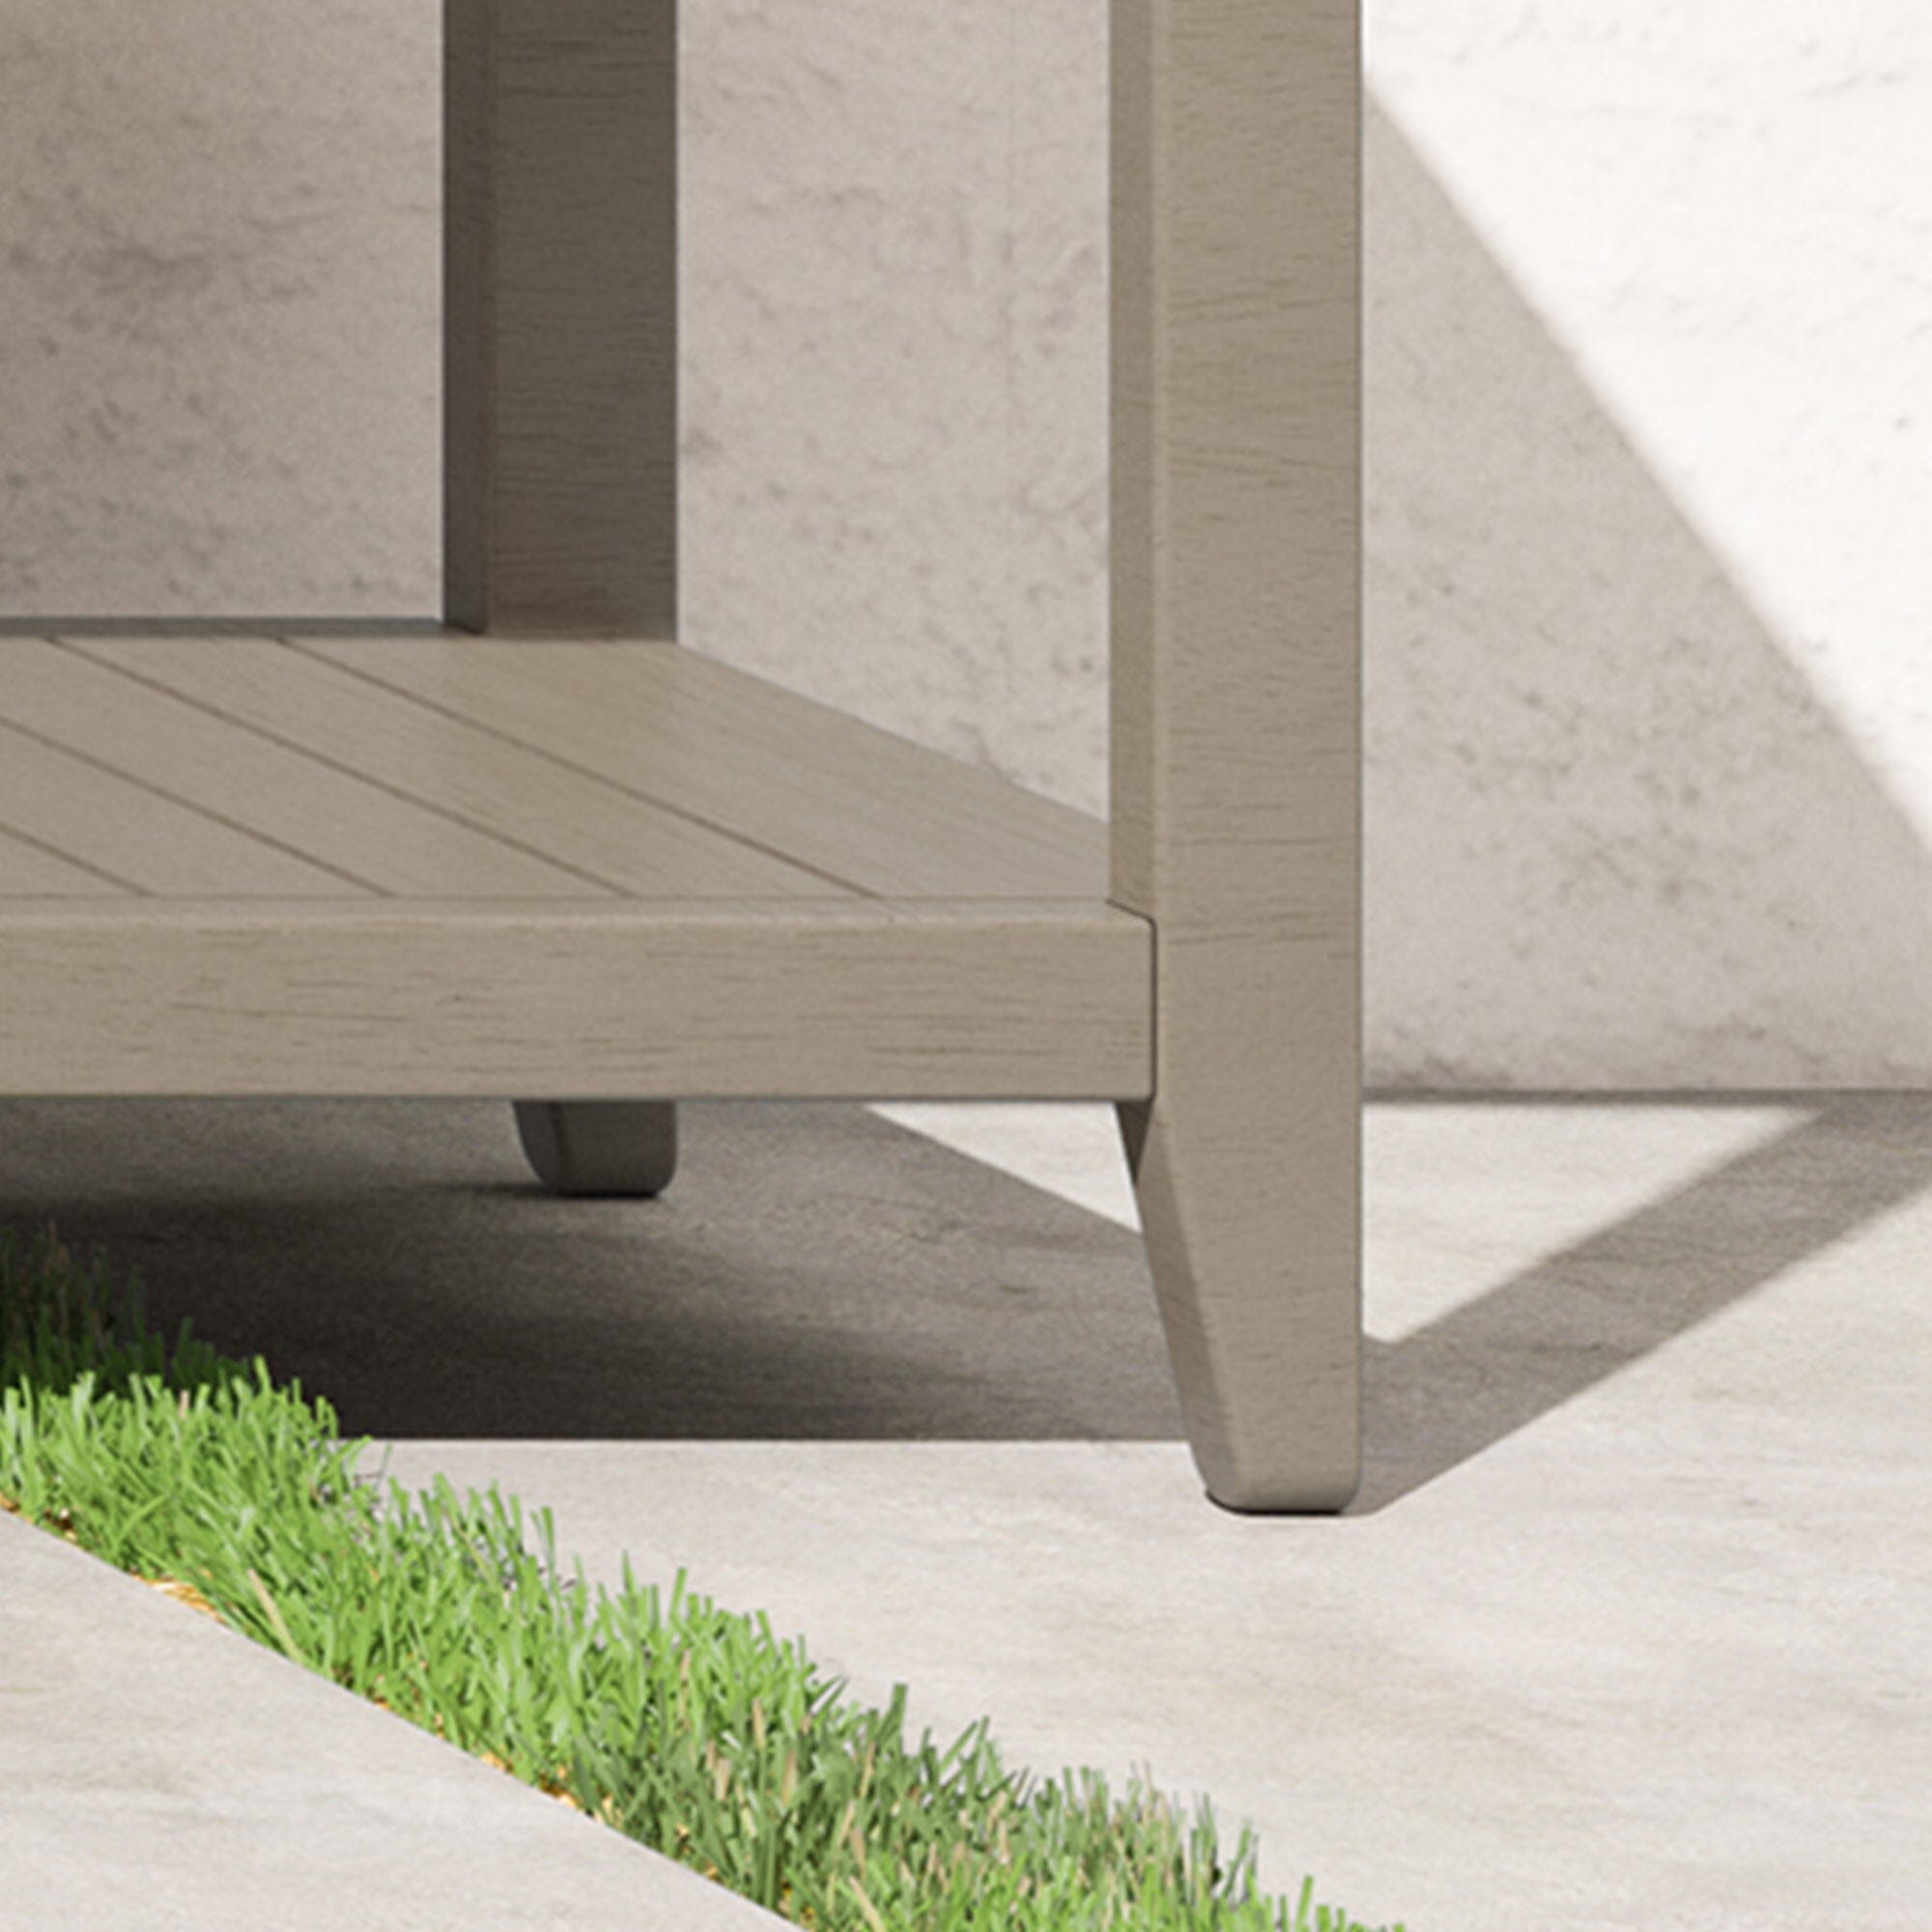 Transitional Outdoor Sofa Table By Sustain Outdoor Sofa Table Sustain